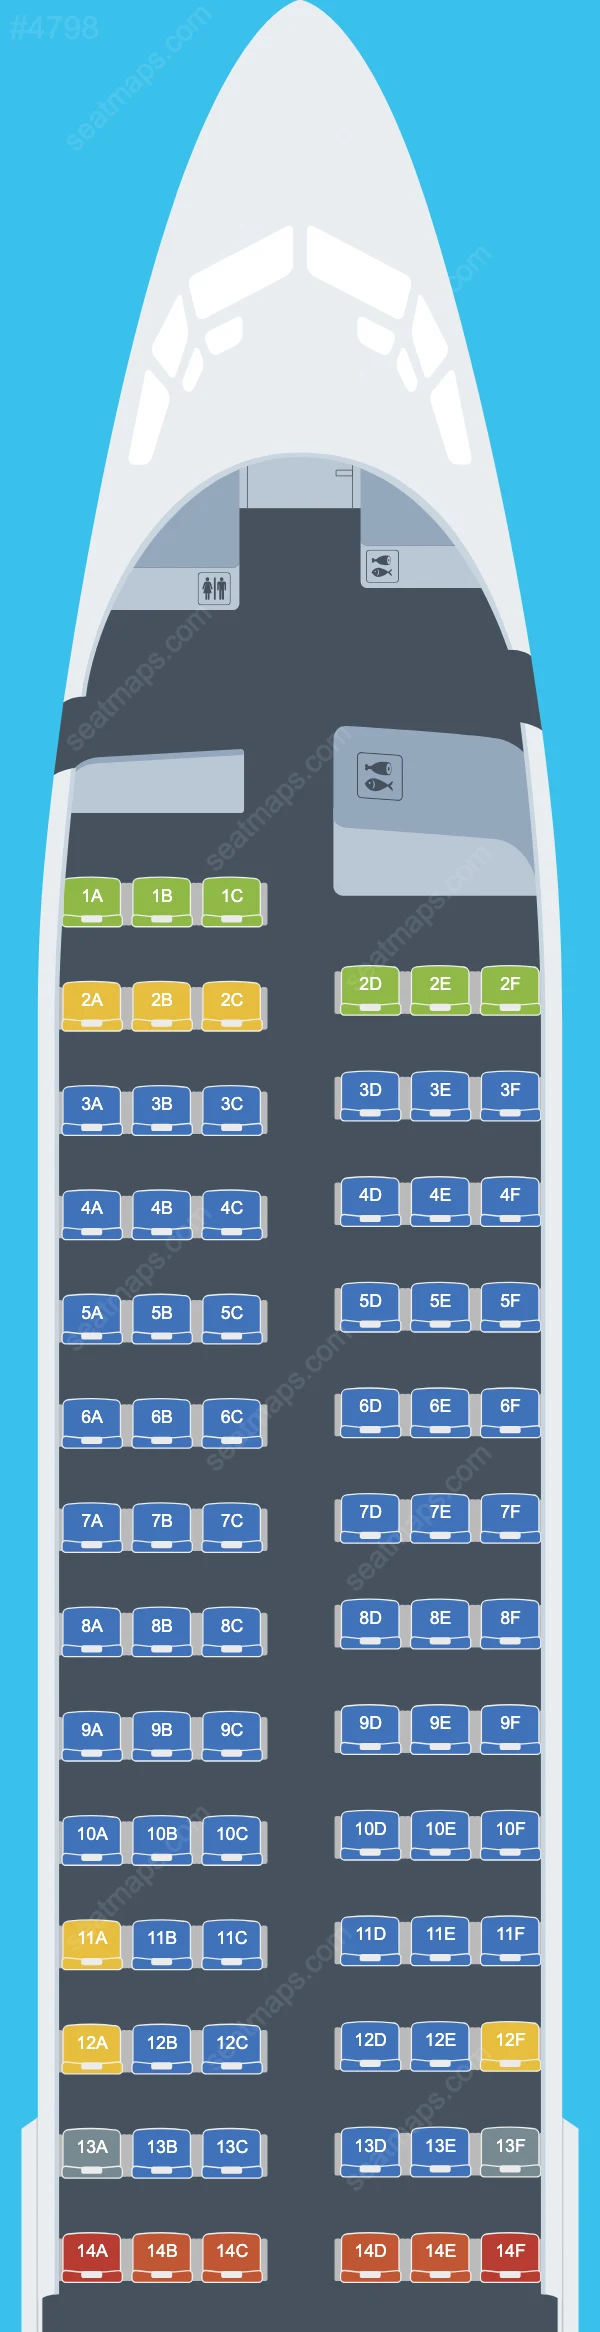 T'way Air Boeing 737 Seat Maps 737-800